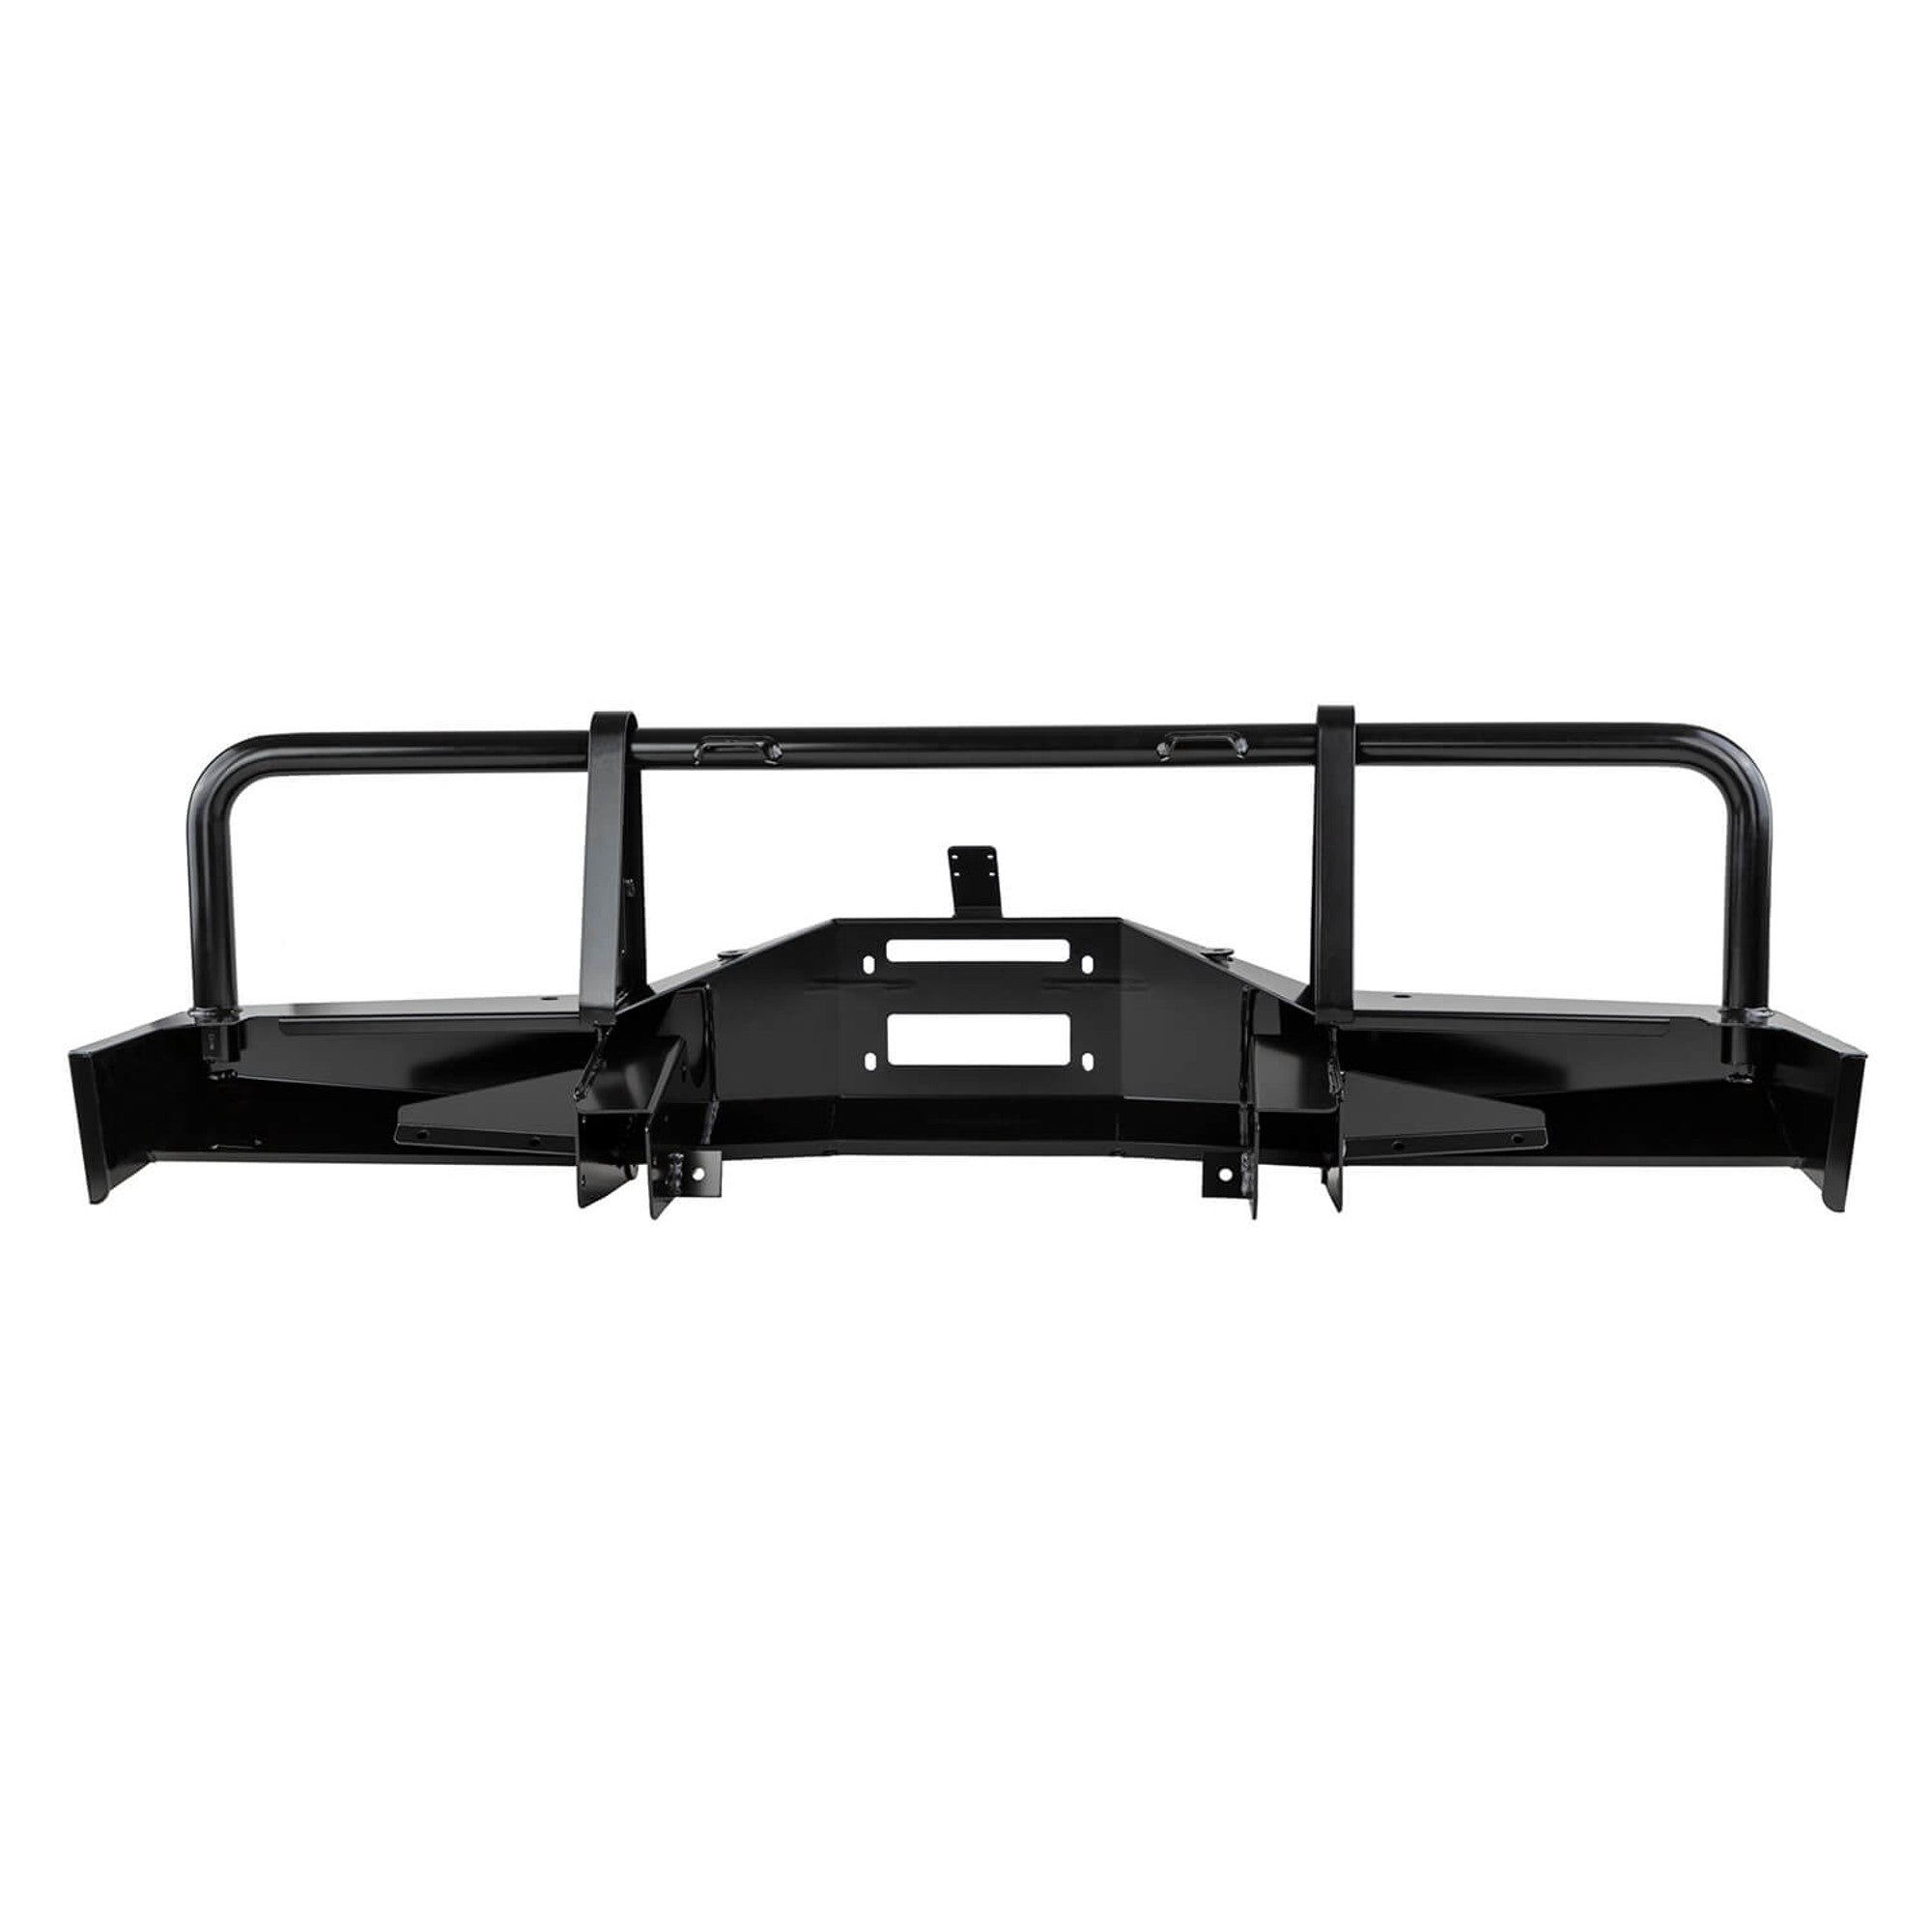 ARB Deluxe Bumper For 1987-1995 Range Rover - 3430020